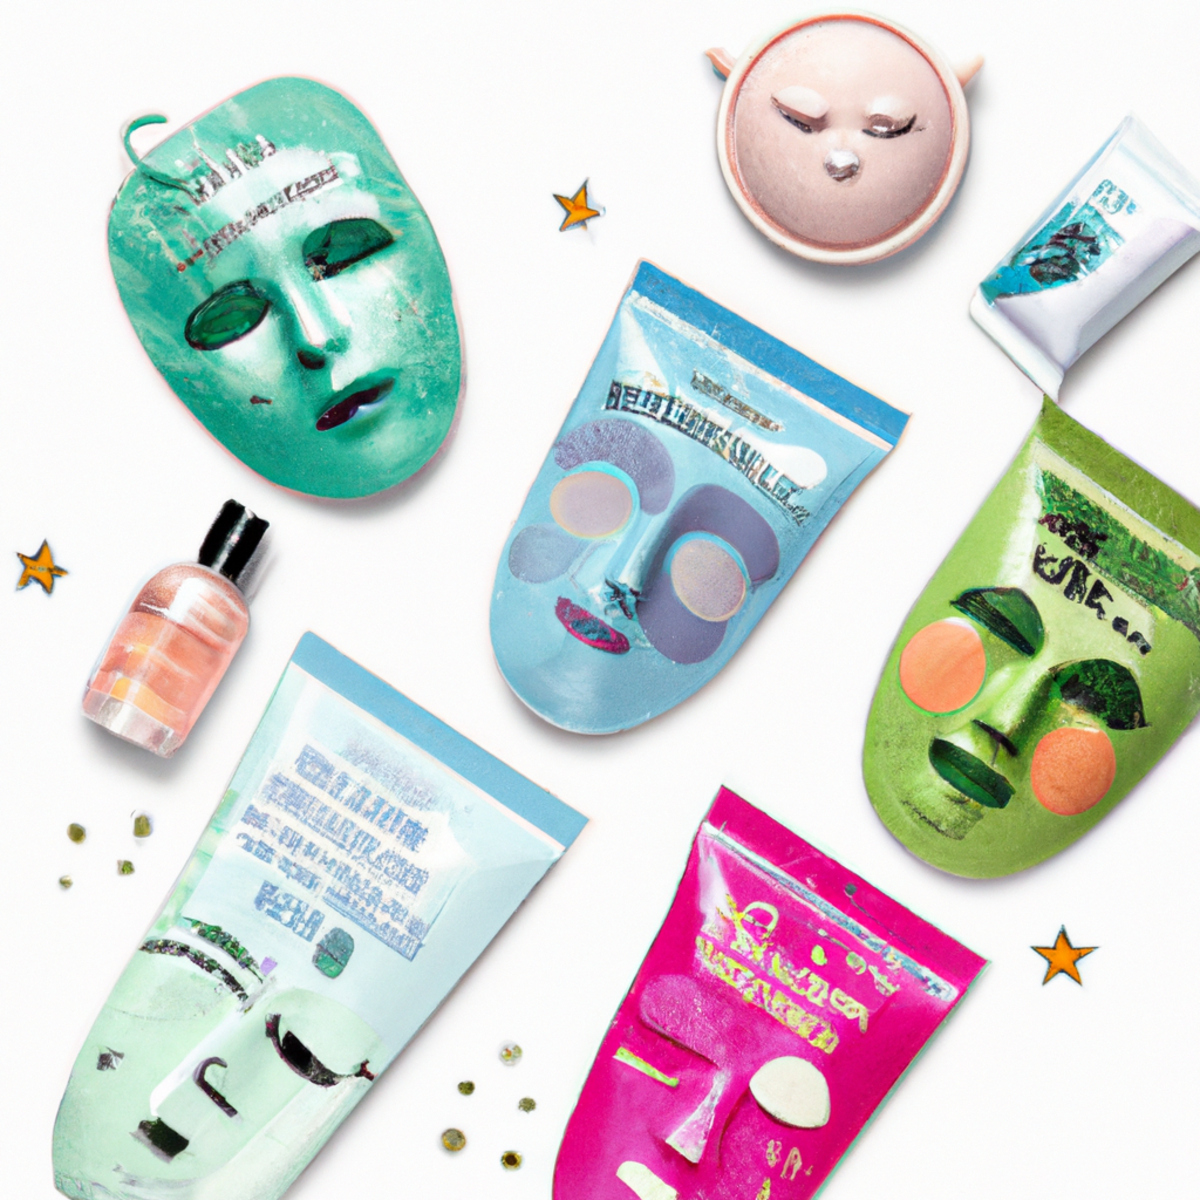 Colorful assortment of face masks and tools for multi-masking, enticing beauty lovers to explore personalized skincare.